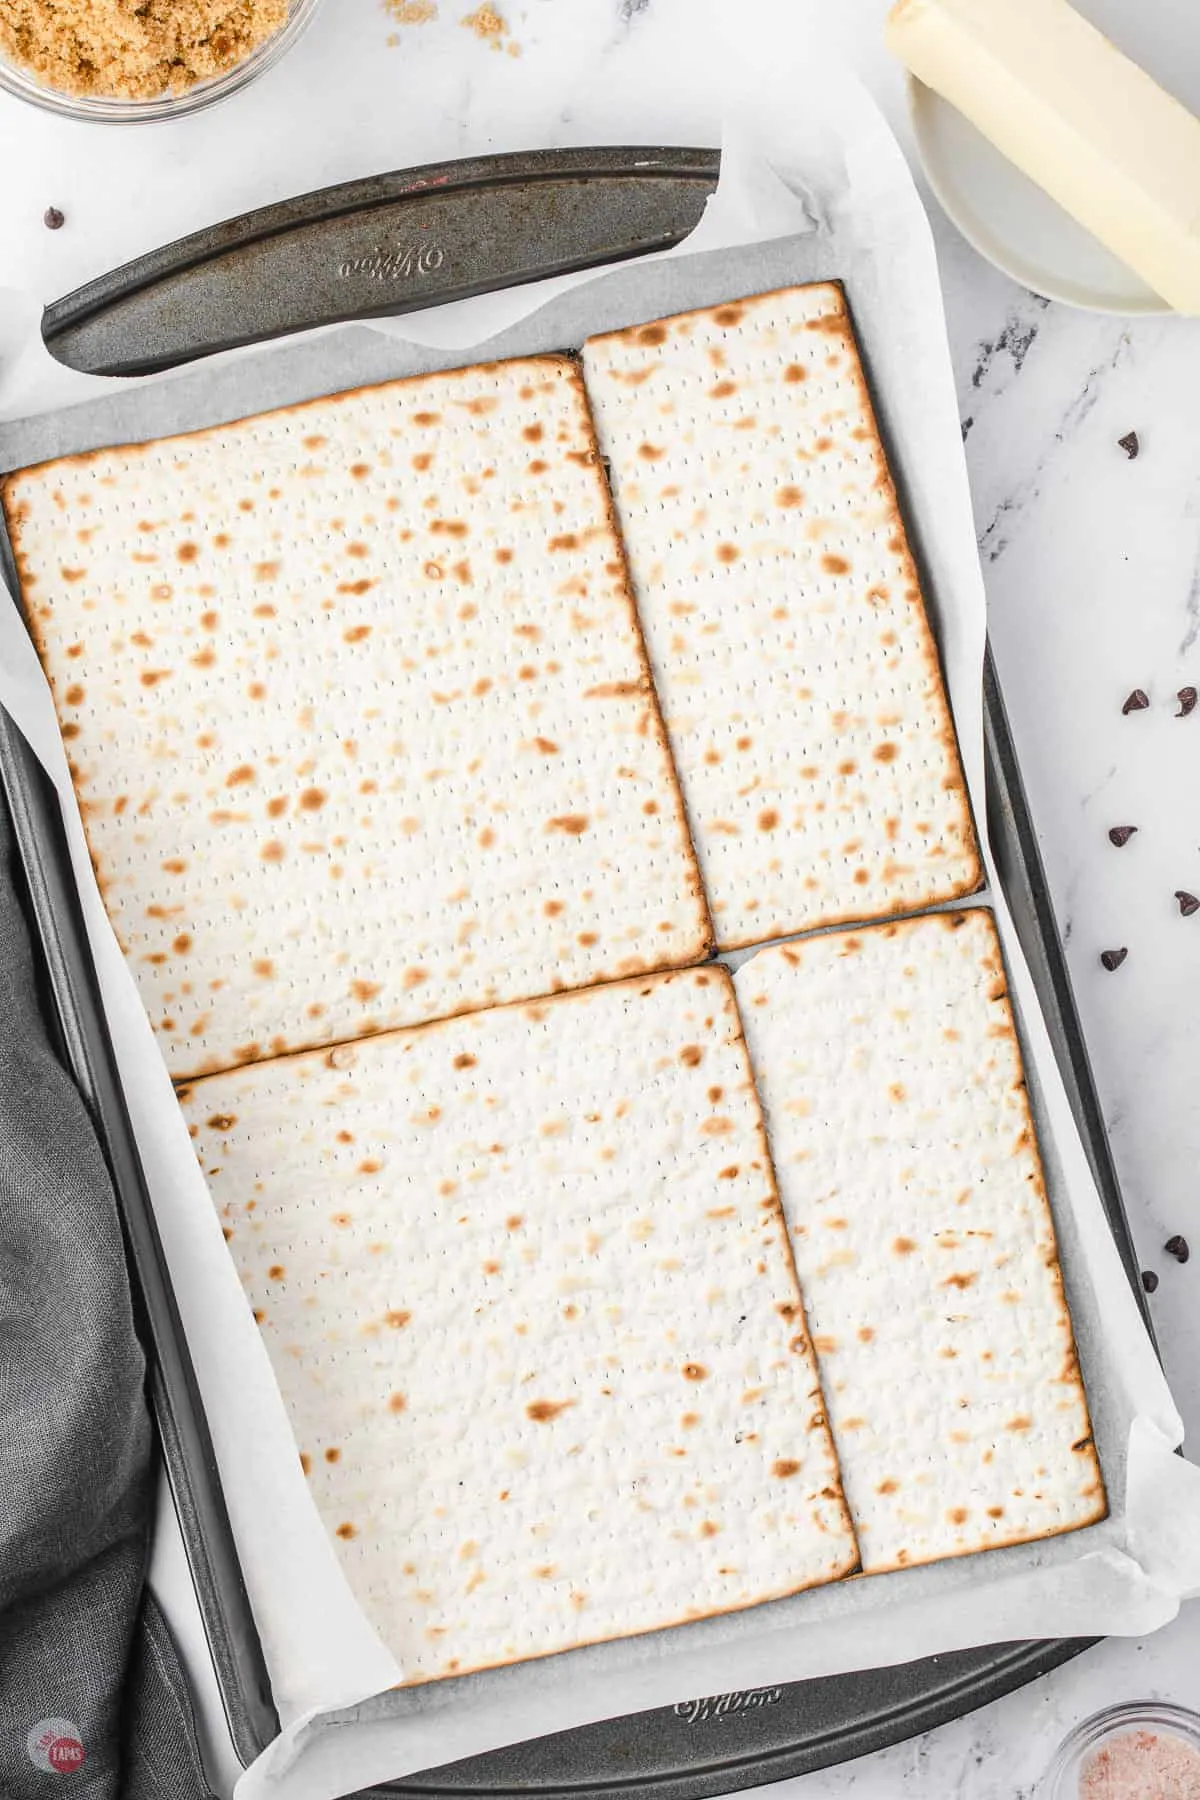 make a single layer of matzo on a sheet of parchment paper